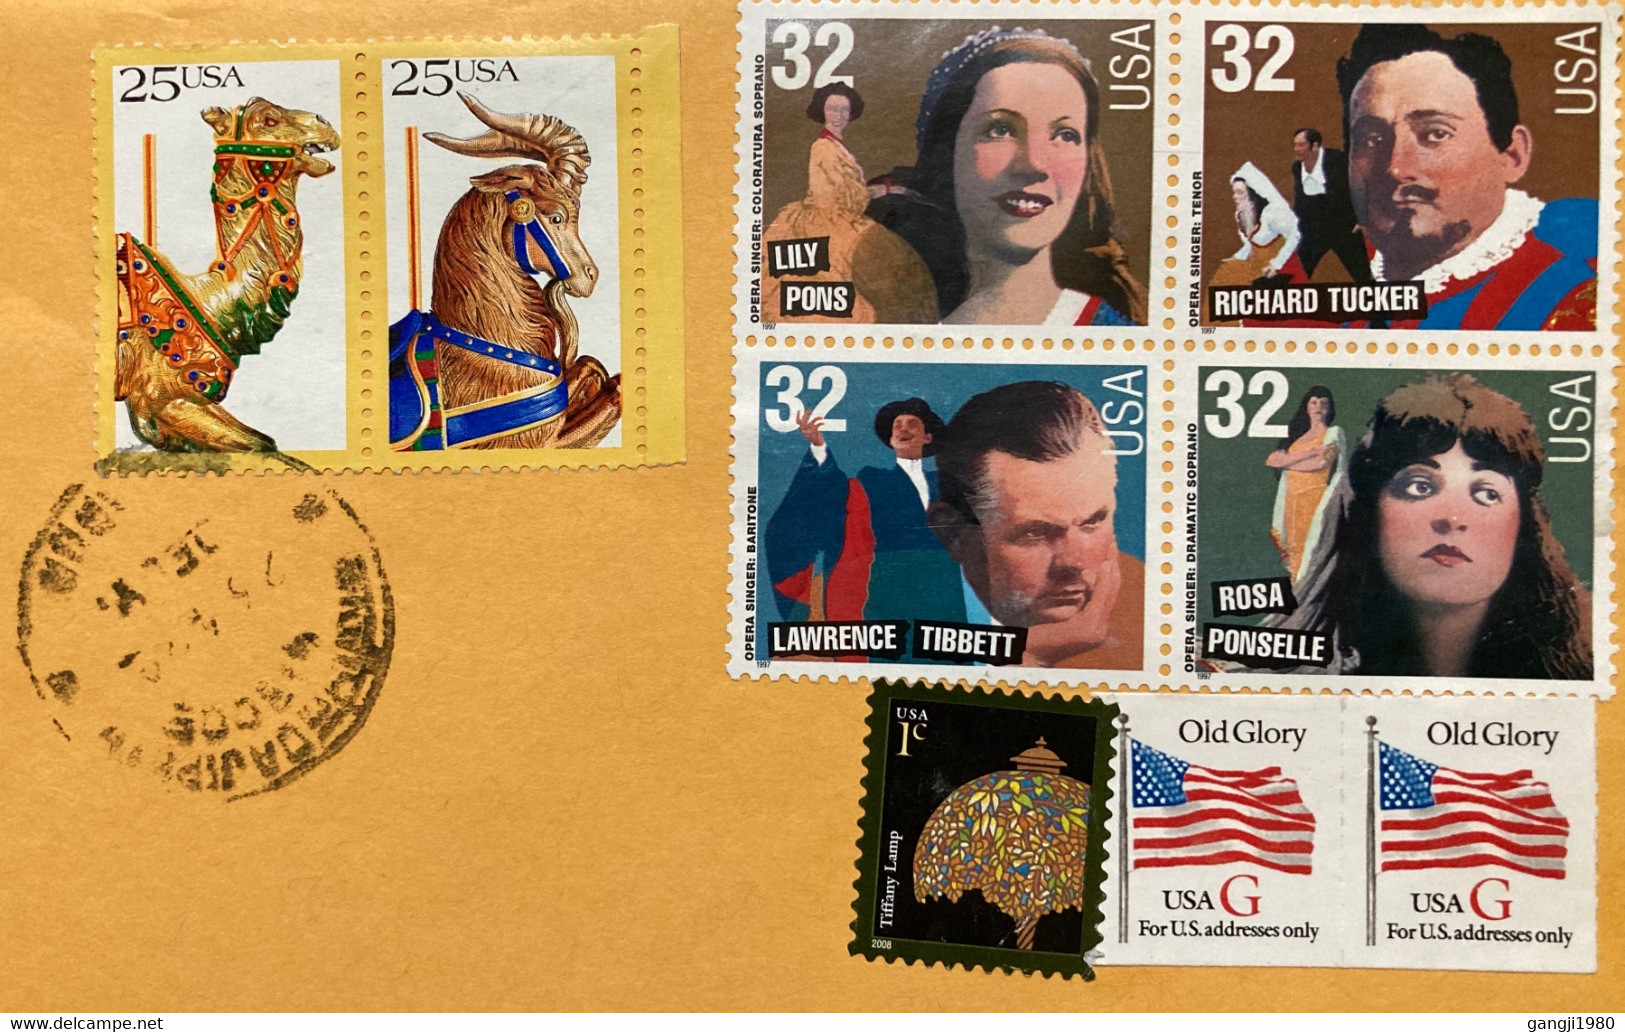 USA 2022,CAMEL ,HORSE,DEER ,OPERA SINGER 4 DIFFERENT FAMOUS,FLAG ,LAMP 9 STAMPS COVER TO INDIA - Lettres & Documents